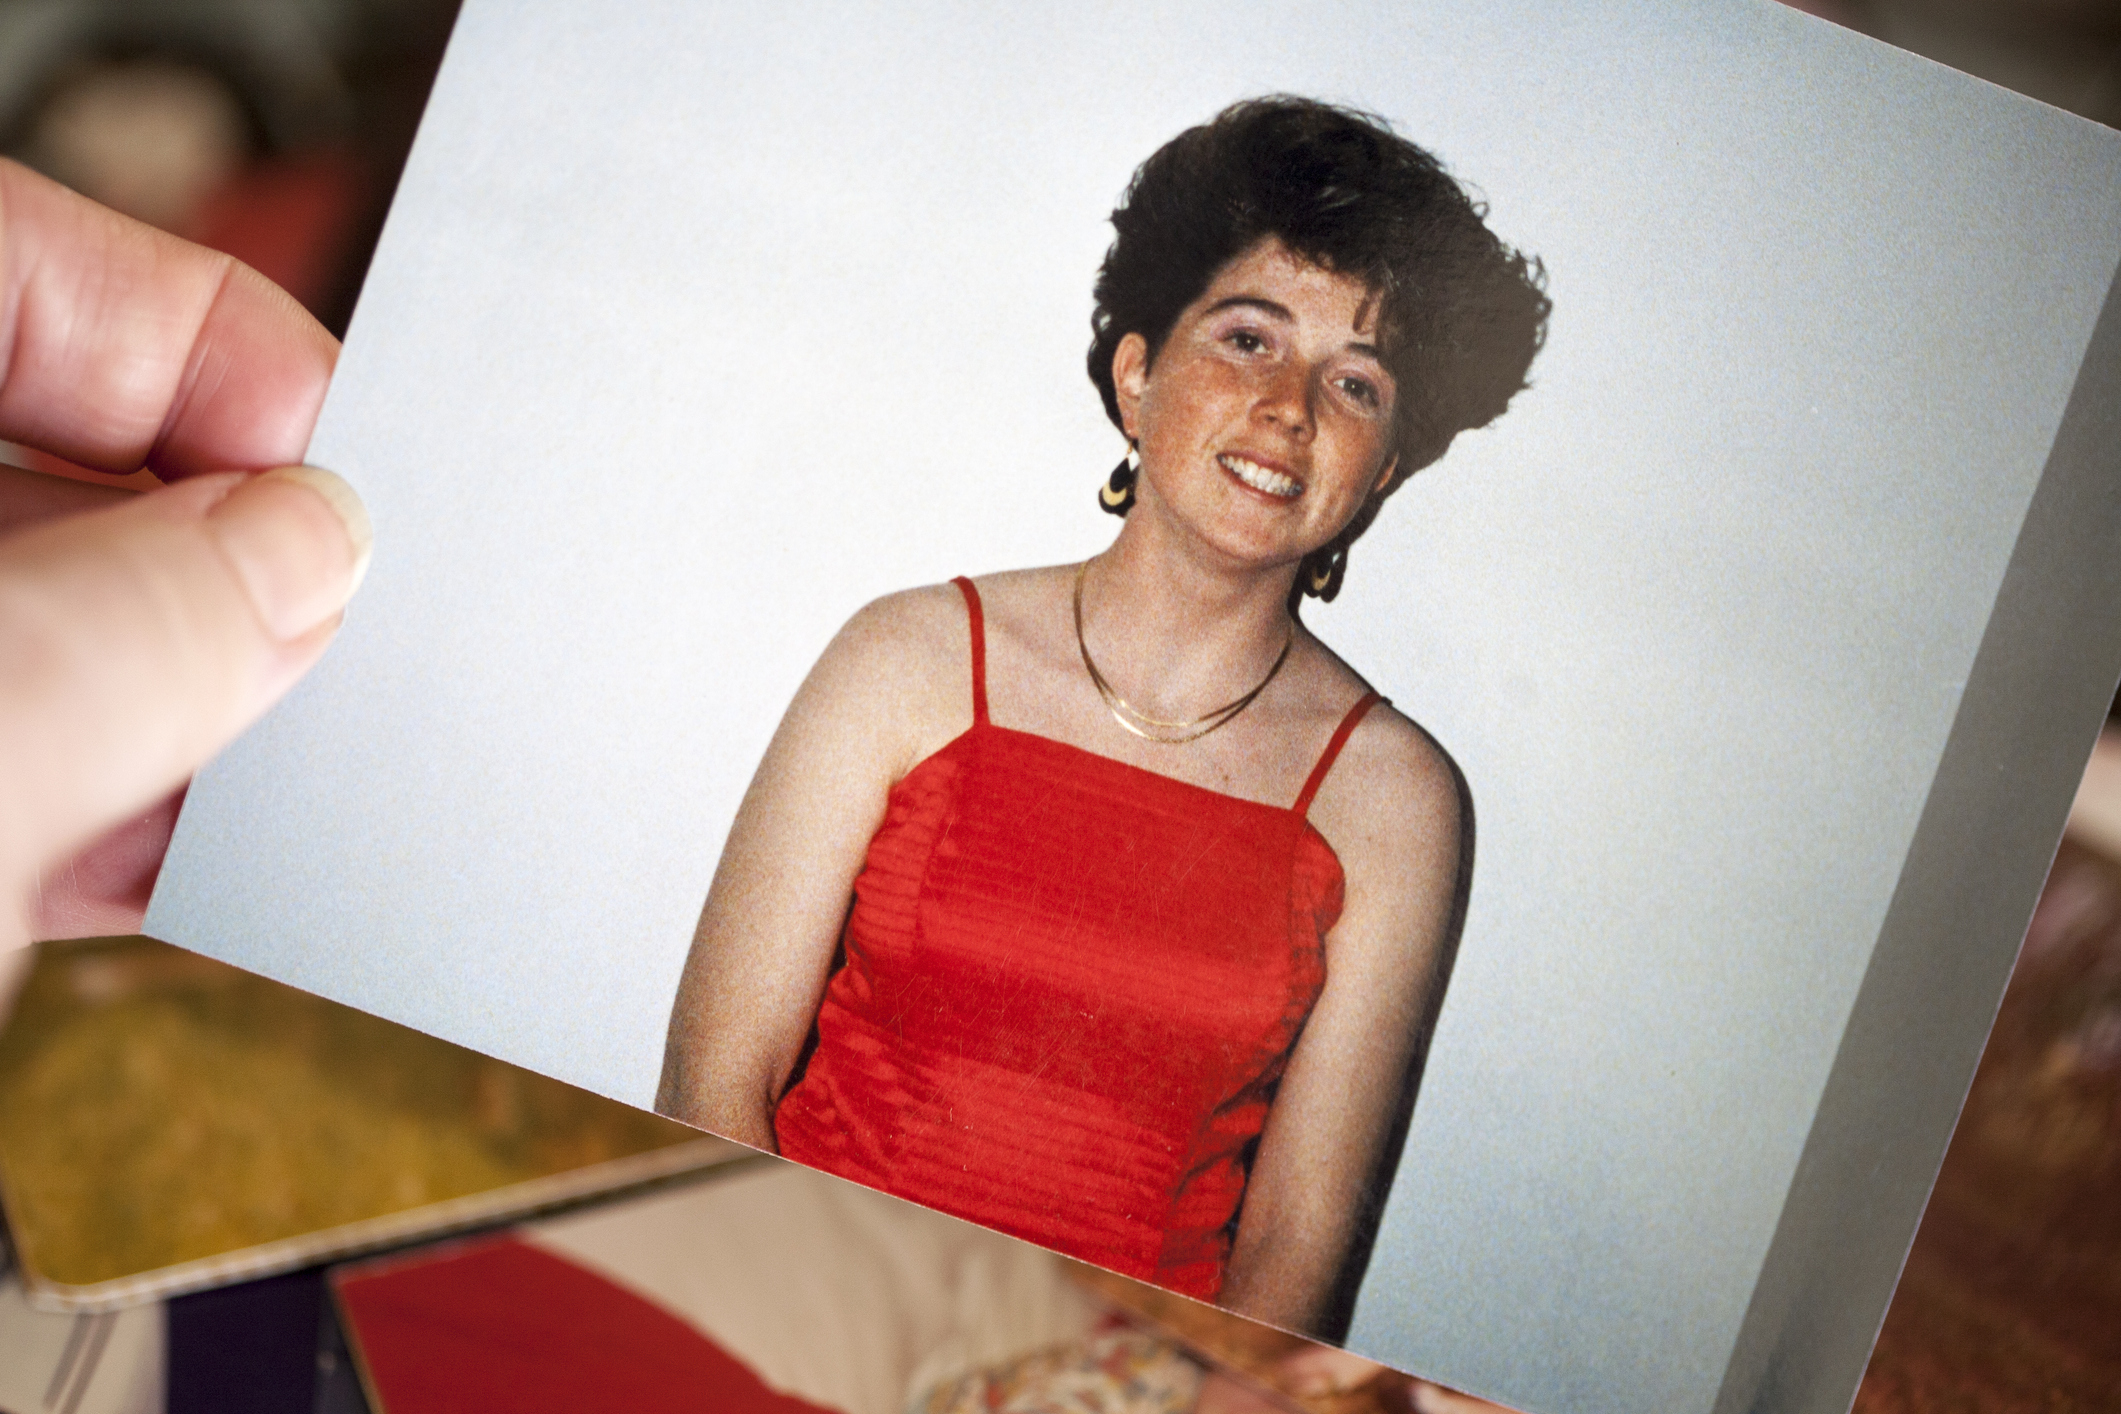 Woman in a sleeveless red dress posing for a photo; part of a series of personal photographs